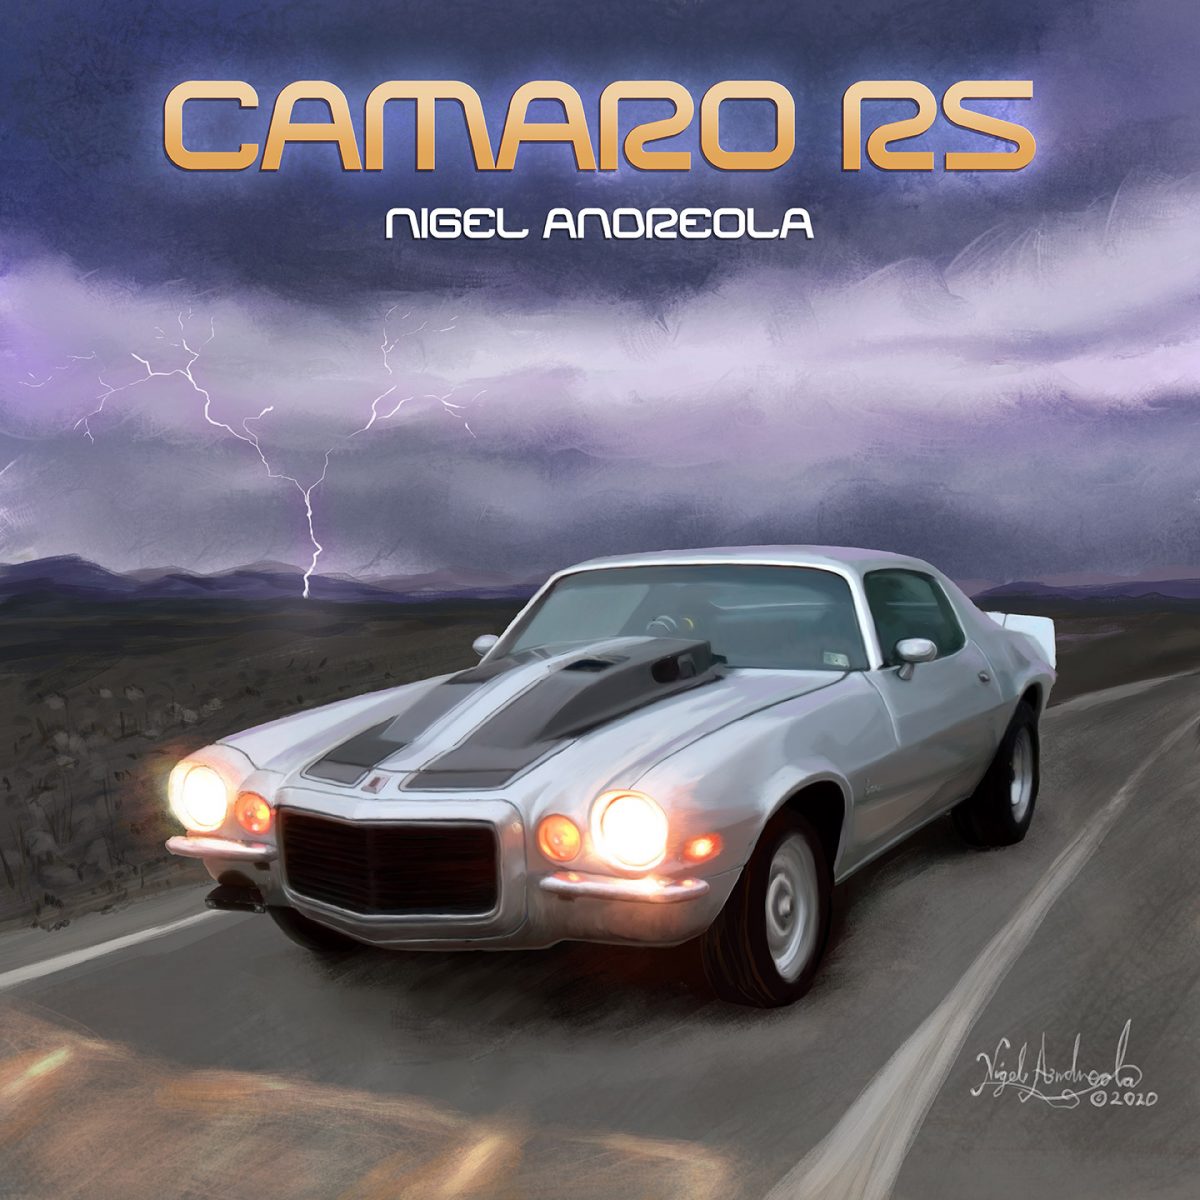 Camaro RS by Nigel Andreola Starry Night Melodies LLC